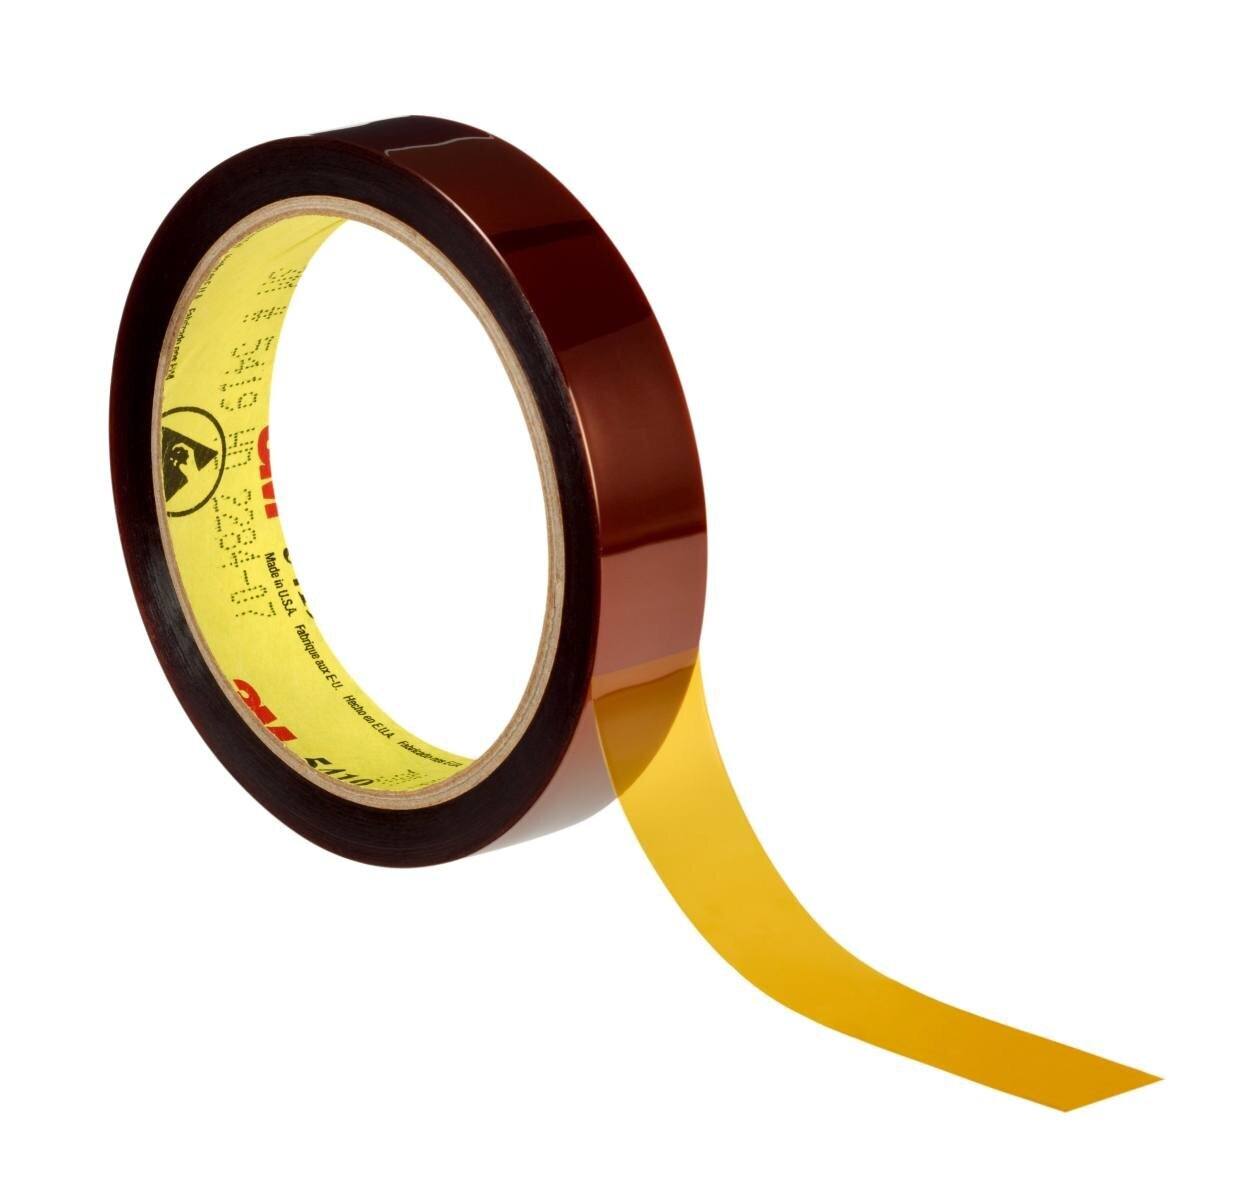 3M high temperature polyimide adhesive tape 5419, brown, 9 mm x 33 m, 68.58 µm